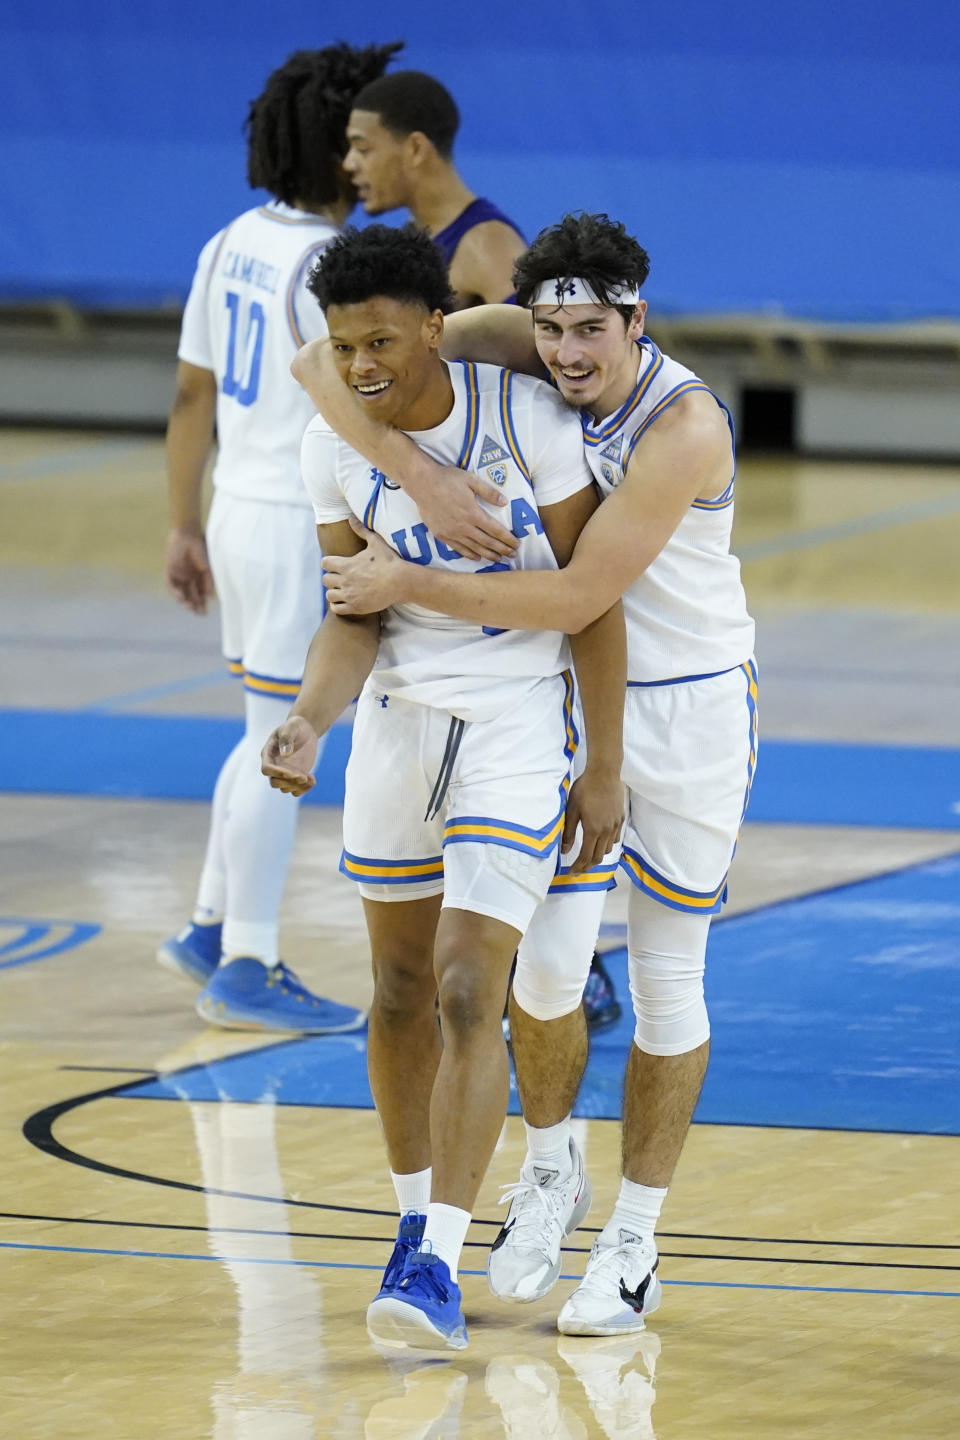 UCLA guard Jaylen Clark, front left, and guard Jaime Jaquez Jr., right, celebrate their win over Washington after an NCAA college basketball game Saturday, Jan. 16, 2021, in Los Angeles. (AP Photo/Ashley Landis)